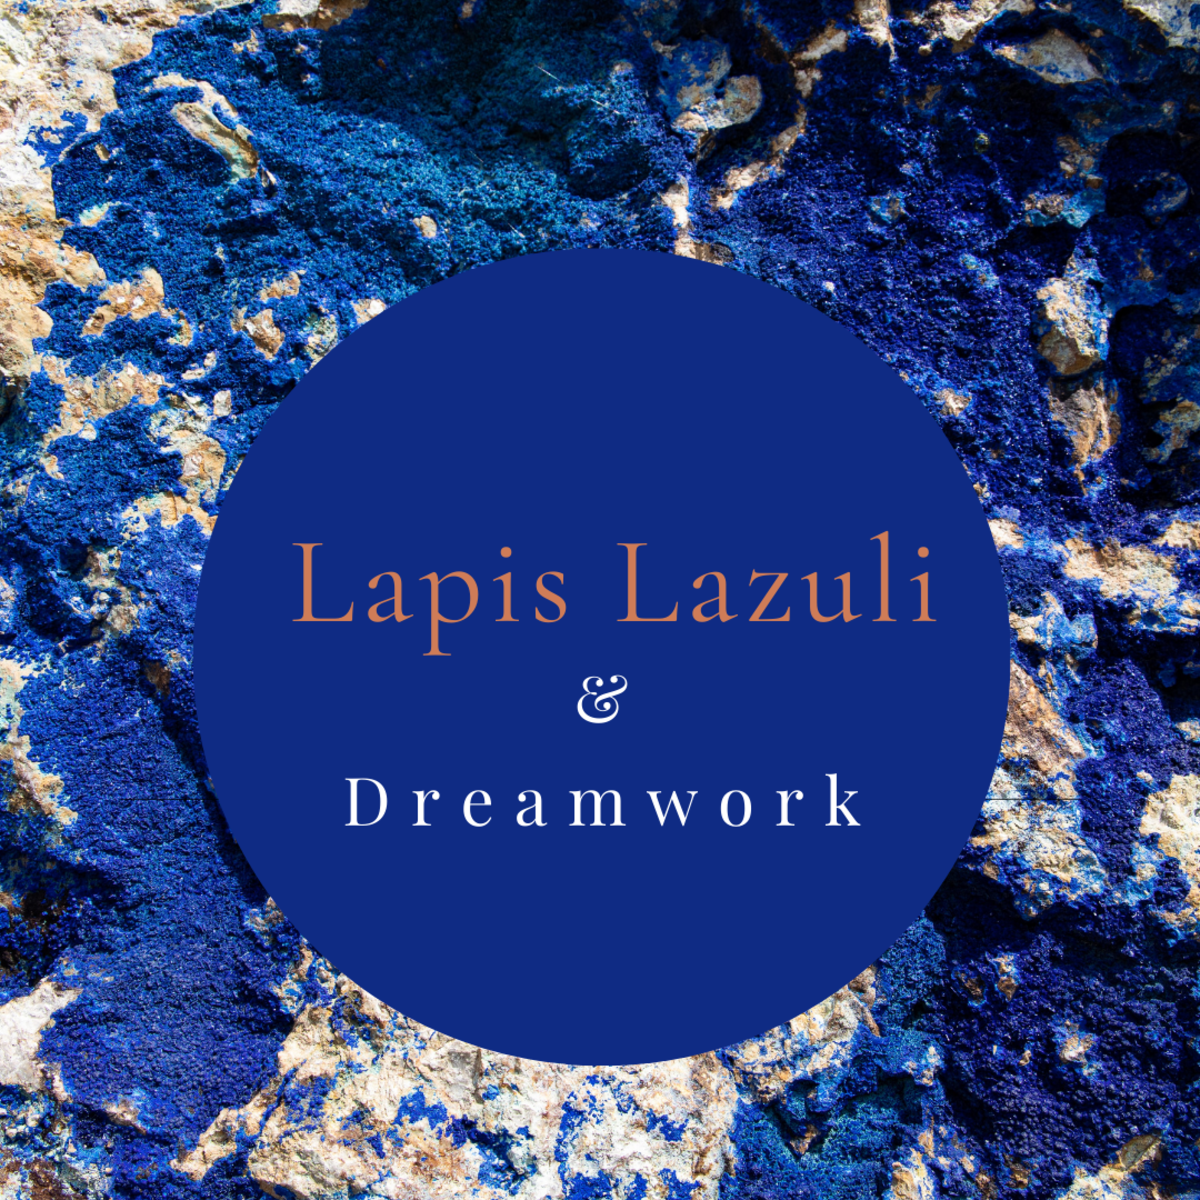 Lapis lazuli is a beautiful stone that can enhance your dream magick.